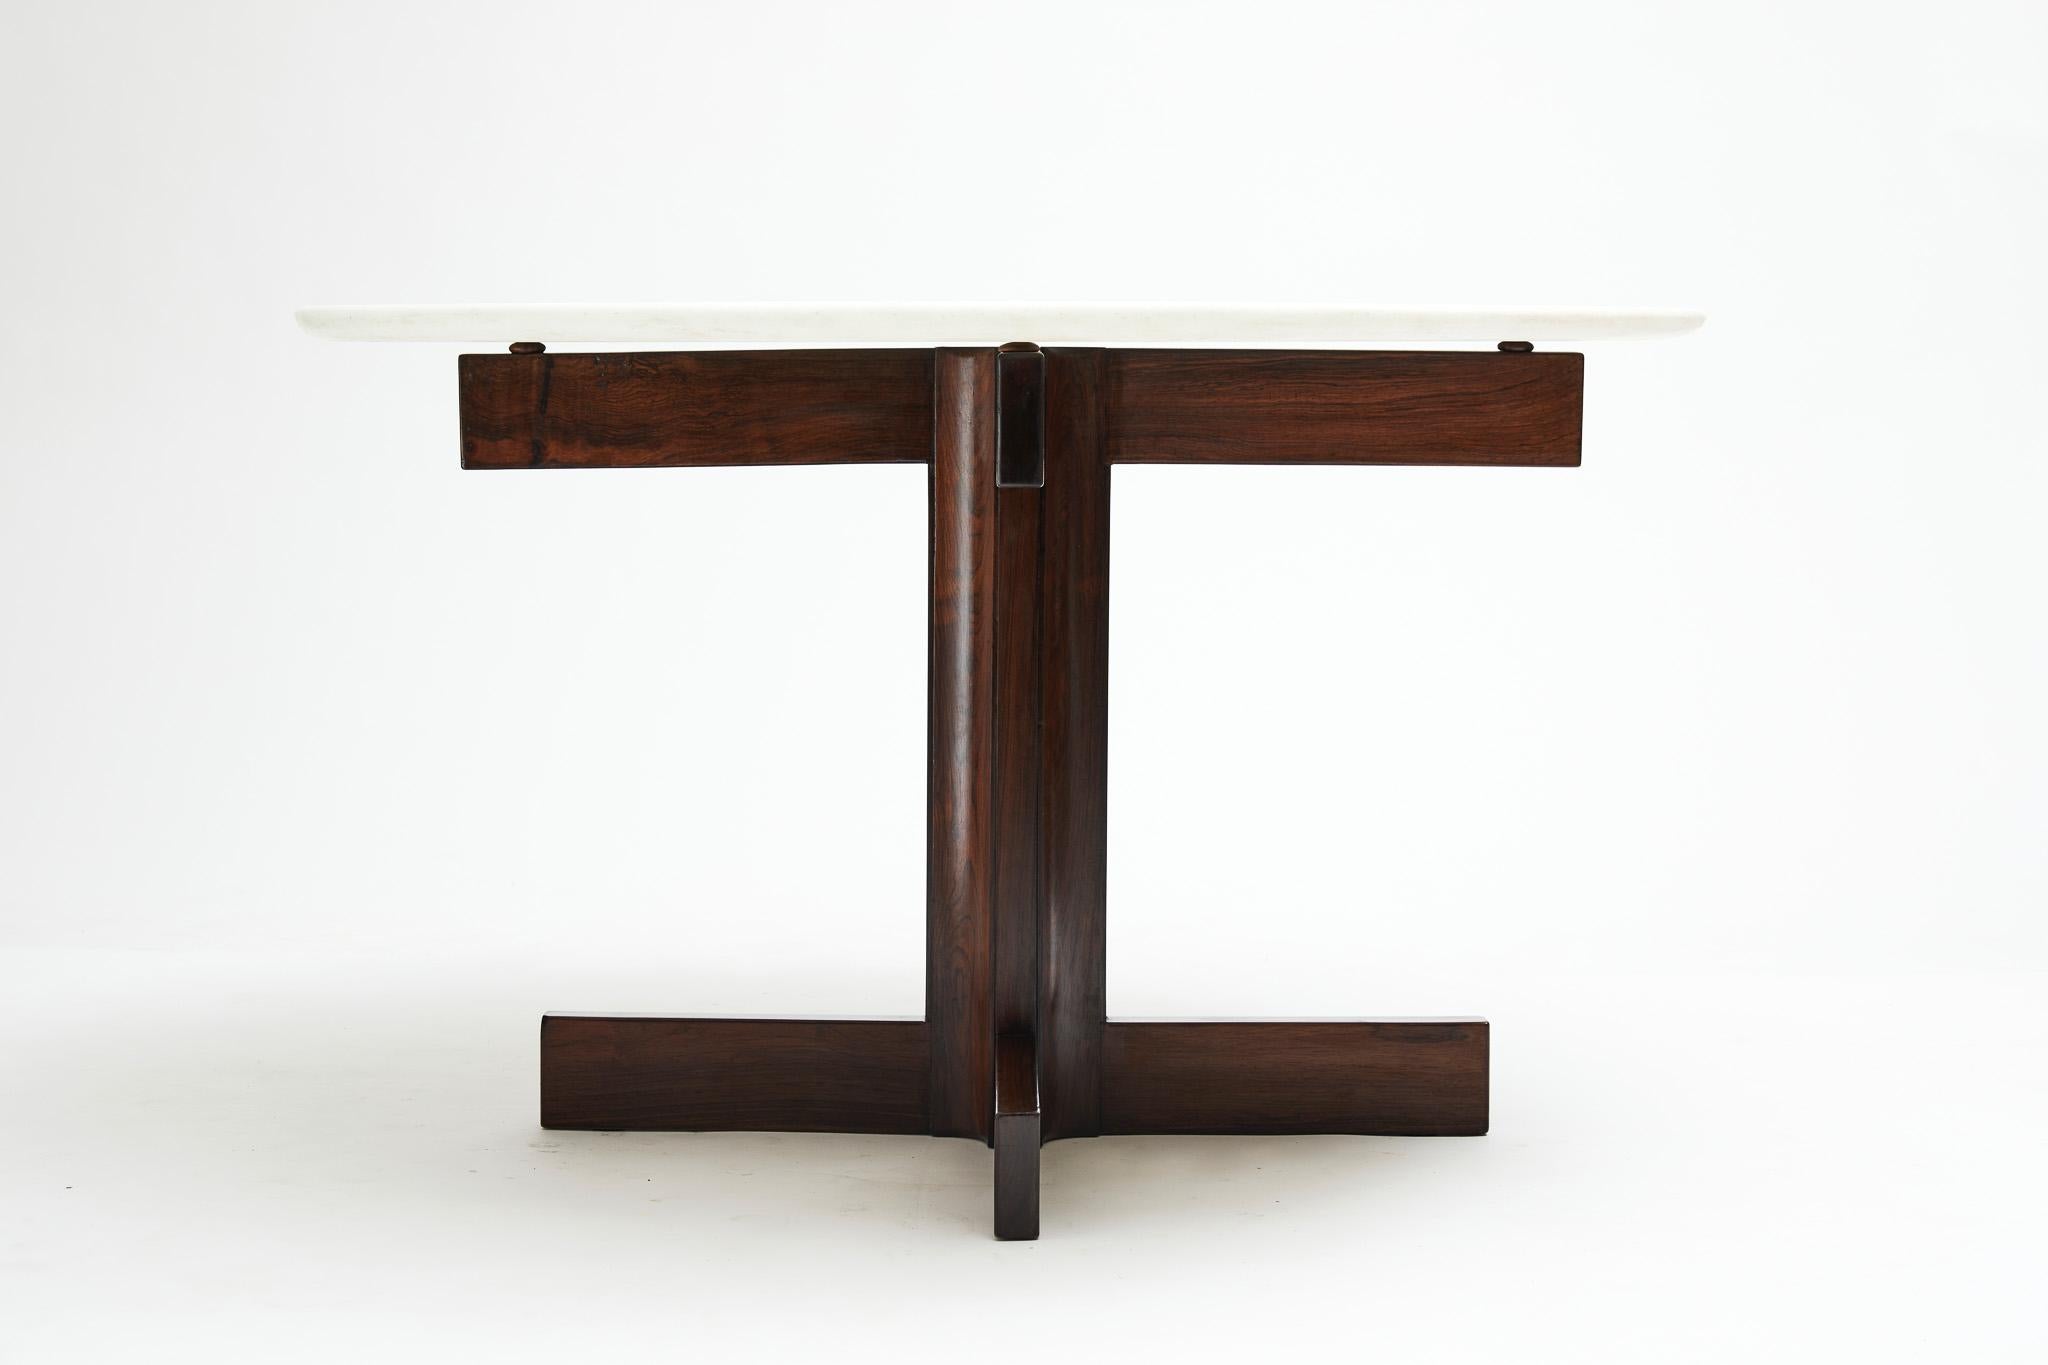 Midcentury Modern Round Dining Table in Hardwood & Marble by Celina, Brazil 1962 For Sale 3